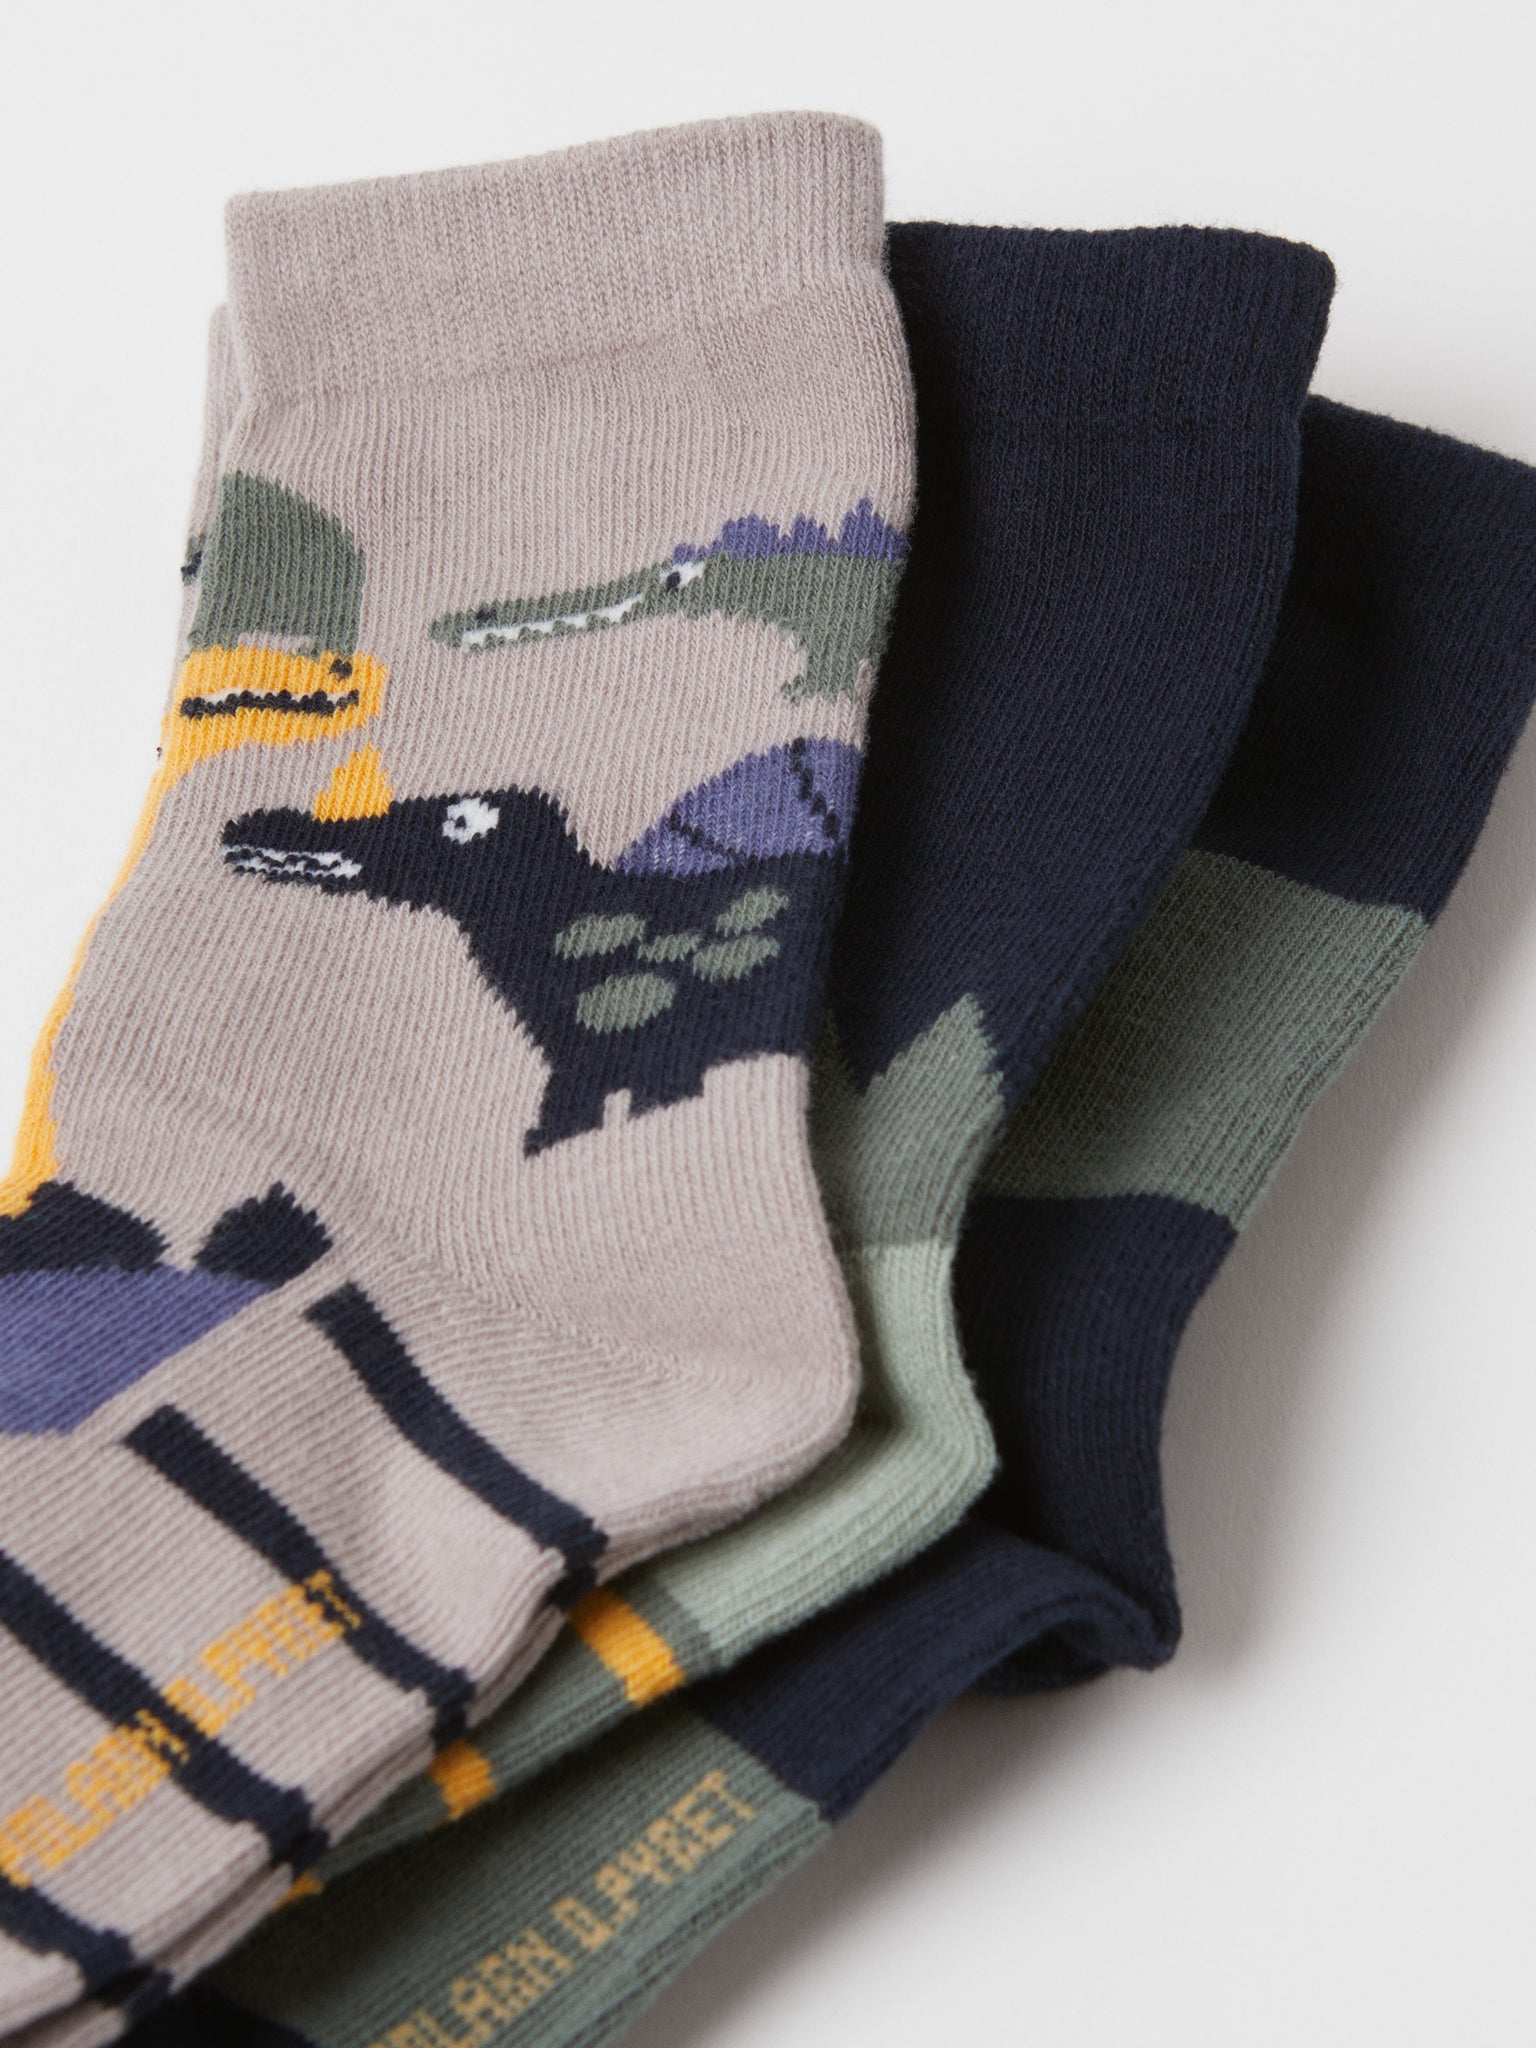 Green Kids Socks Multipack from the Polarn O. Pyret kidswear collection. The best ethical kids clothes